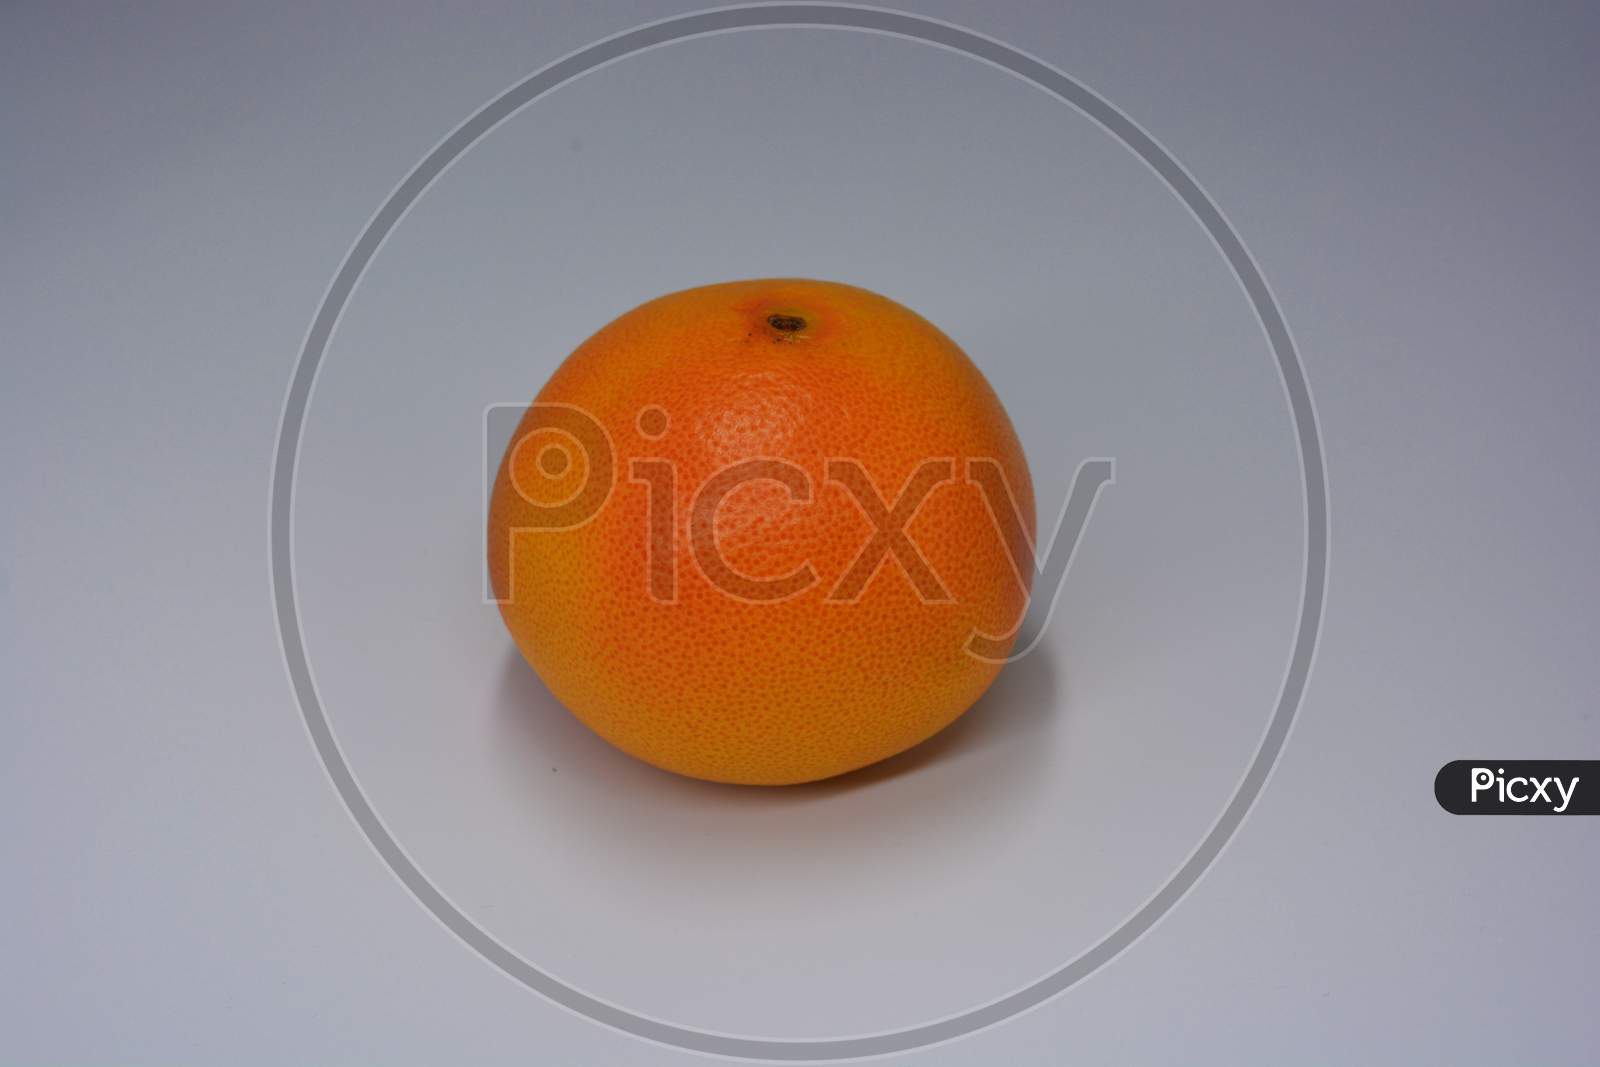 One big ripe delicious orange-red grapefruit arranged on a white plate. Delicious and healthy sweet and sour fruits for the human body and health.